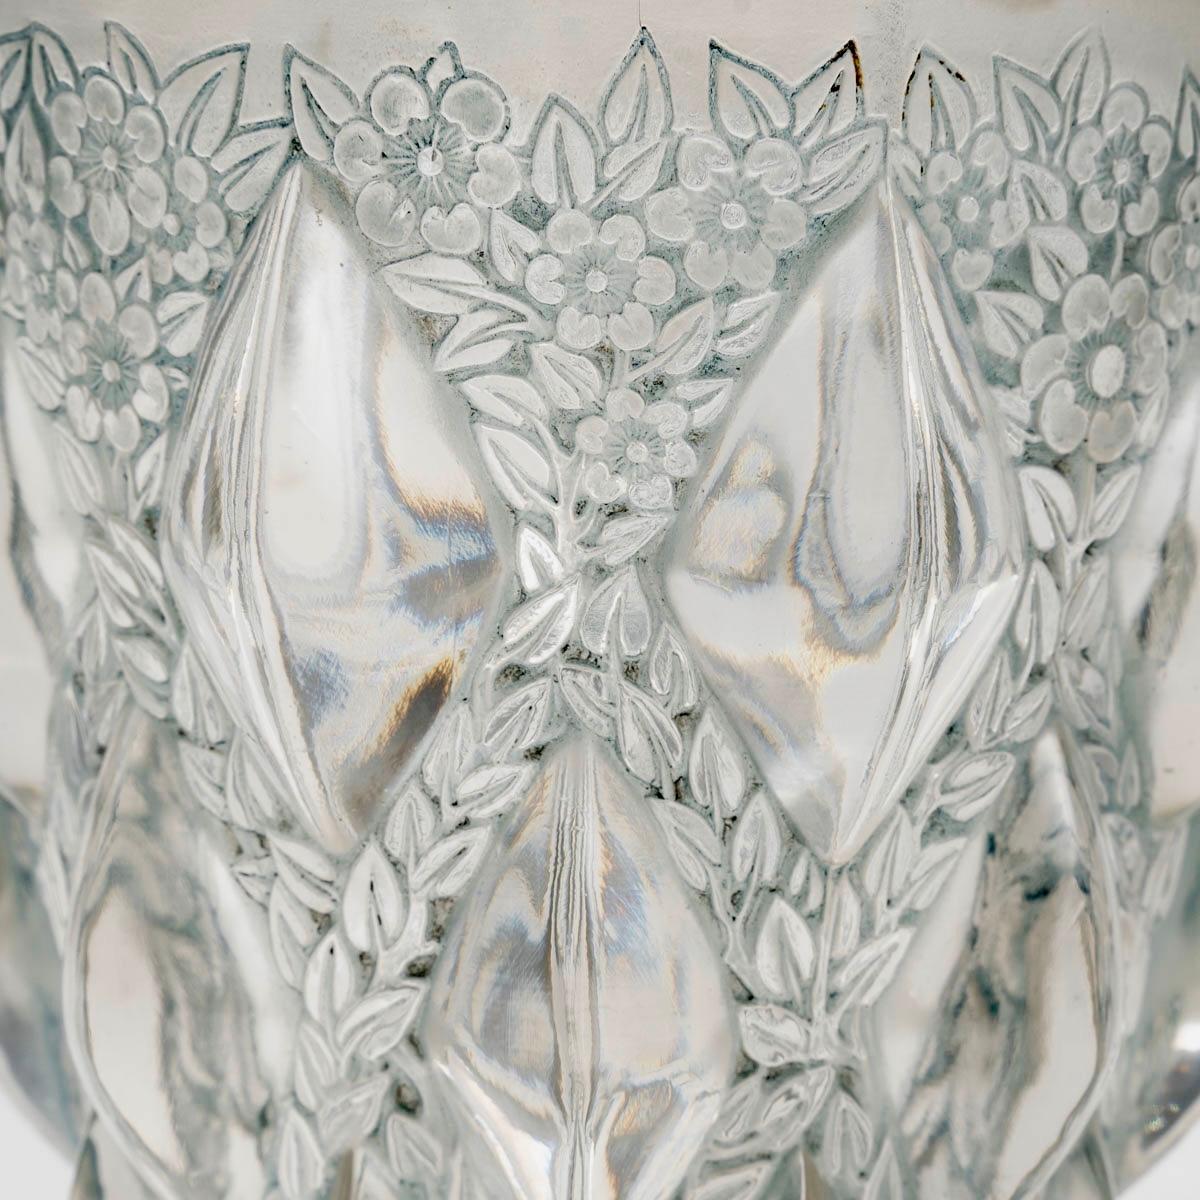 Molded 1927 René Lalique Vase Rampillon Frosted Glass with Blue-Grey Patina